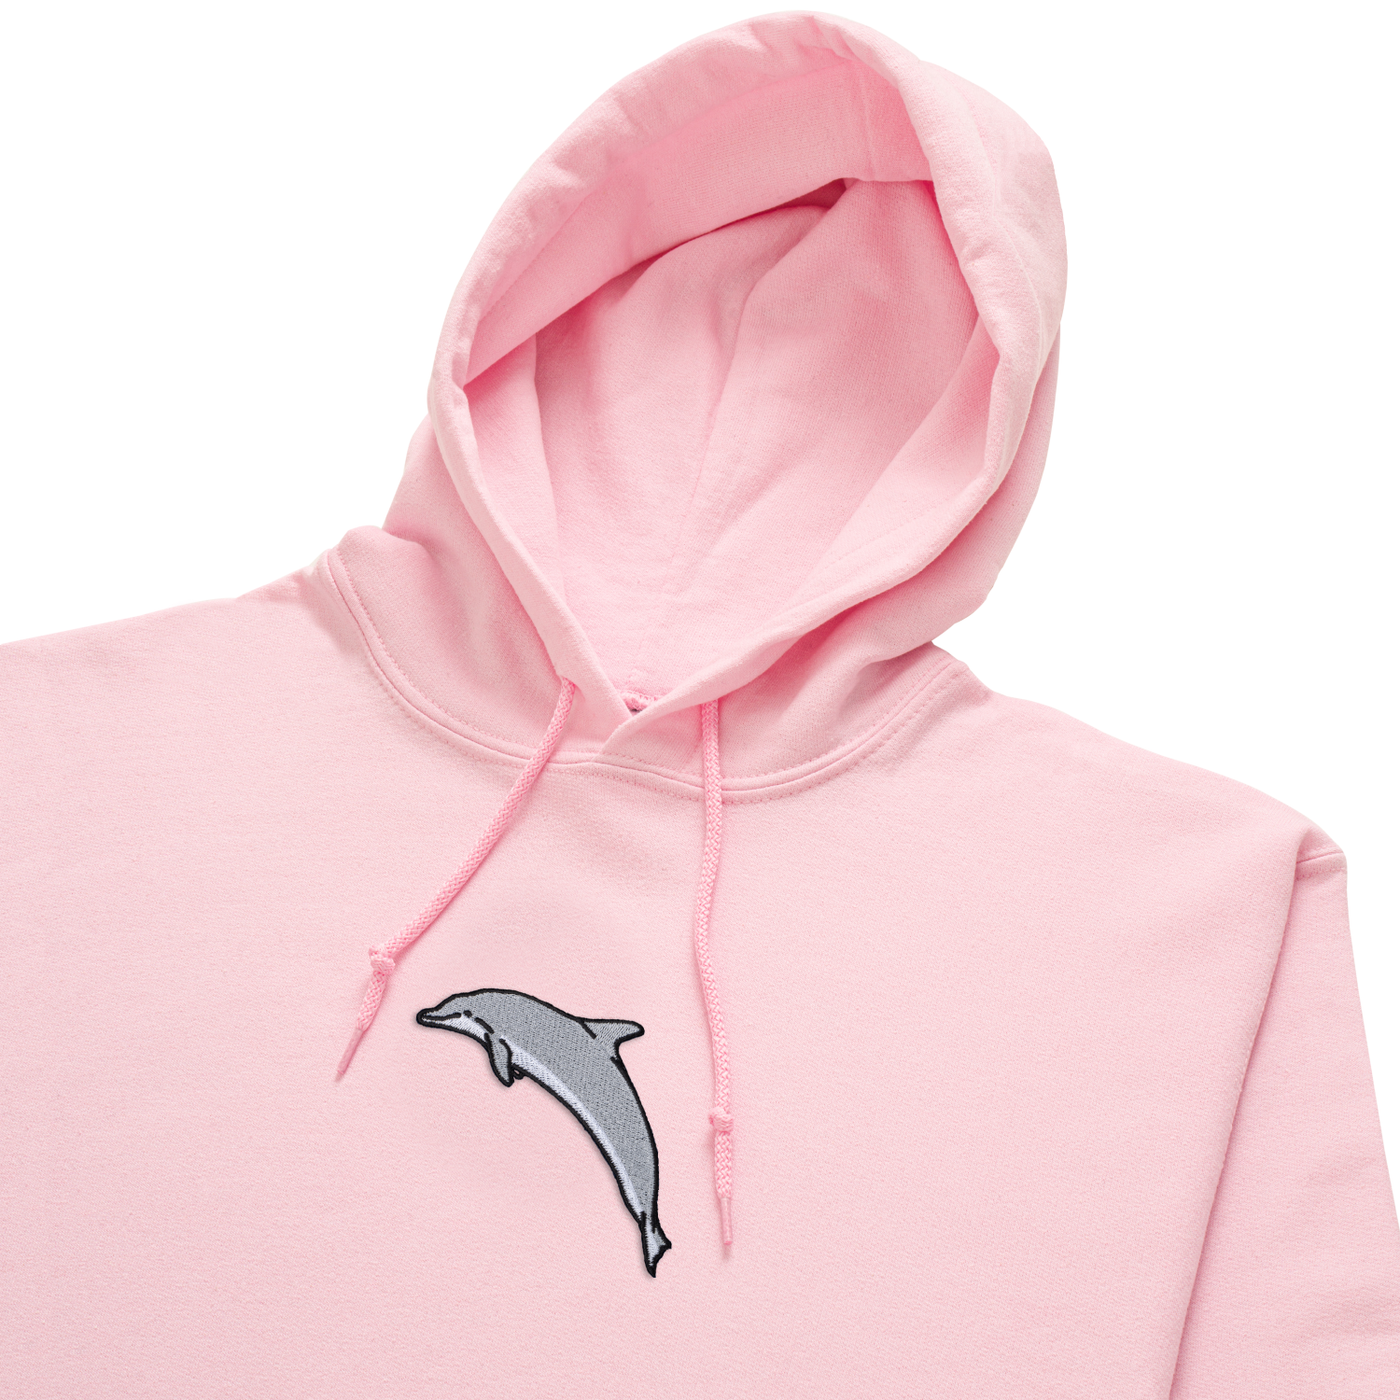 Bobby's Planet Women's Embroidered Dolphin Hoodie from Seven Seas Fish Animals Collection in Light Pink Color#color_light-pink